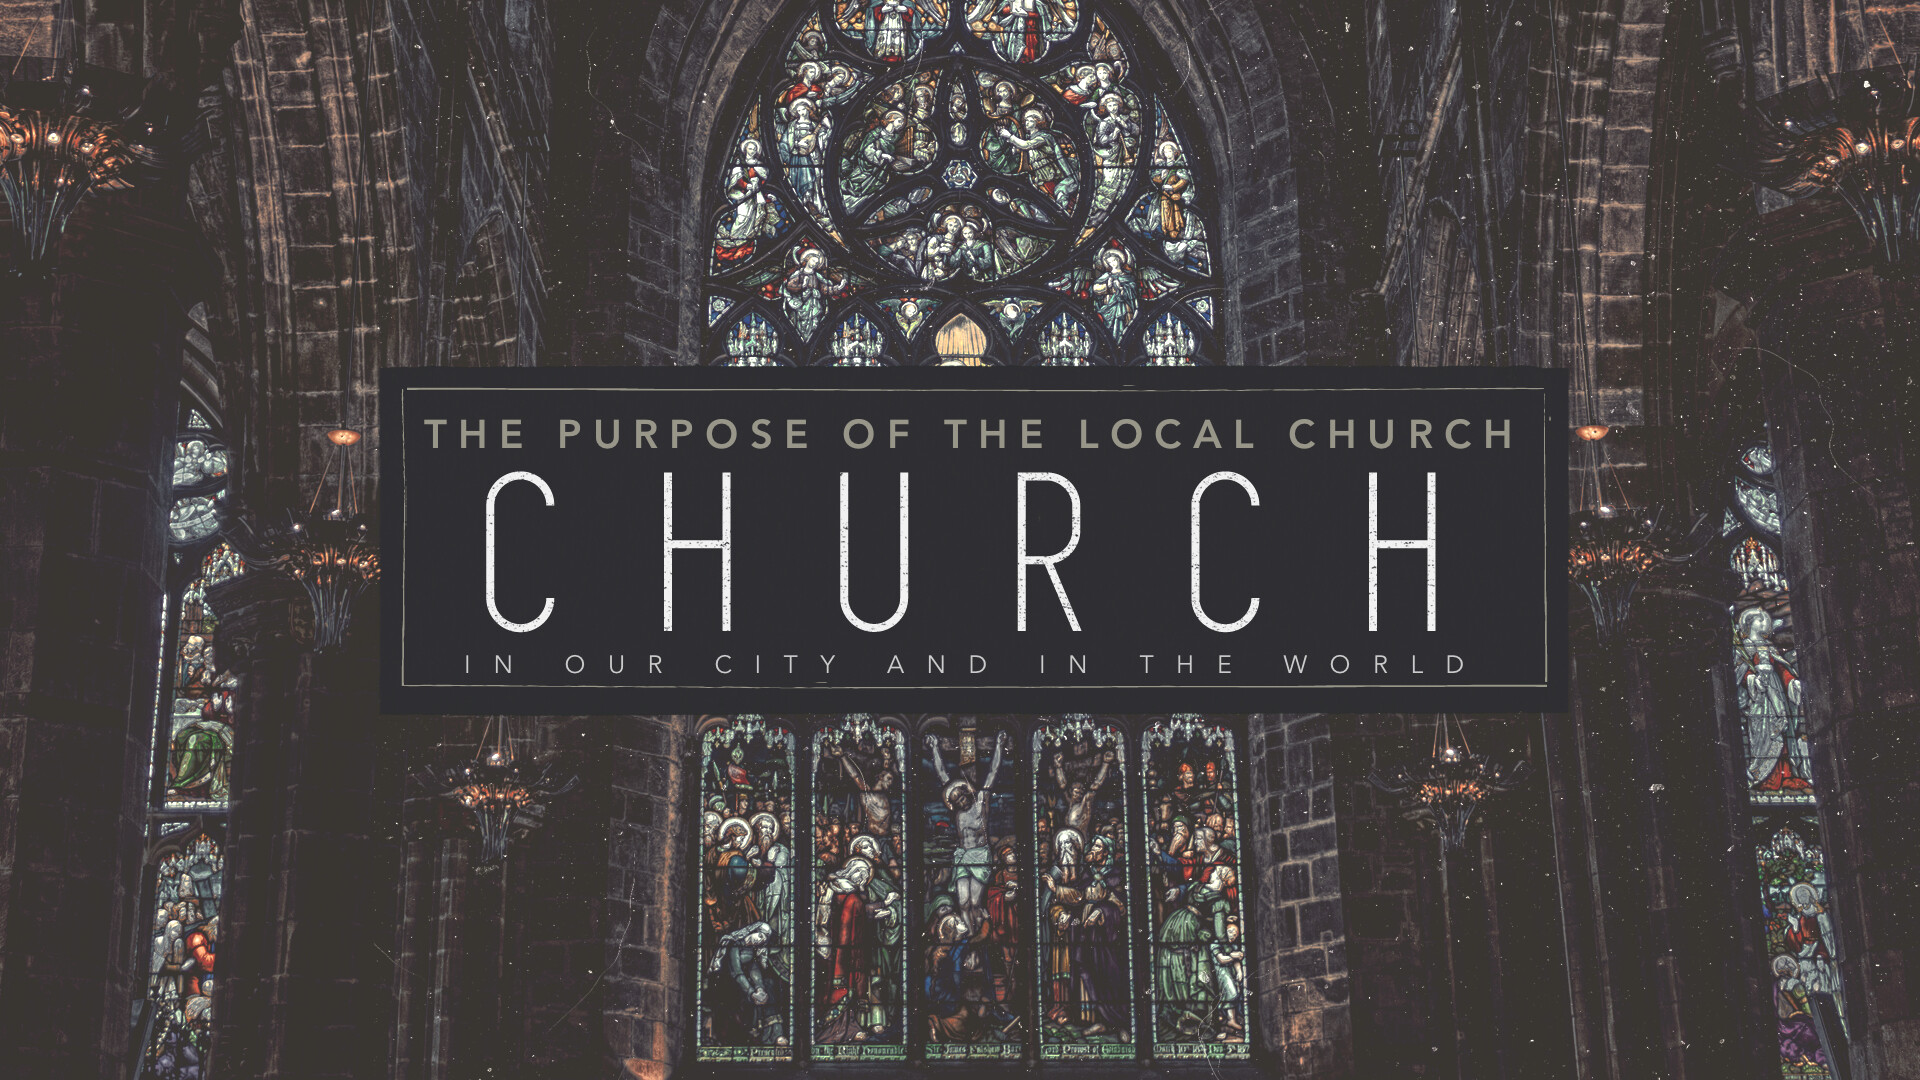 The Purpose of the Local Church